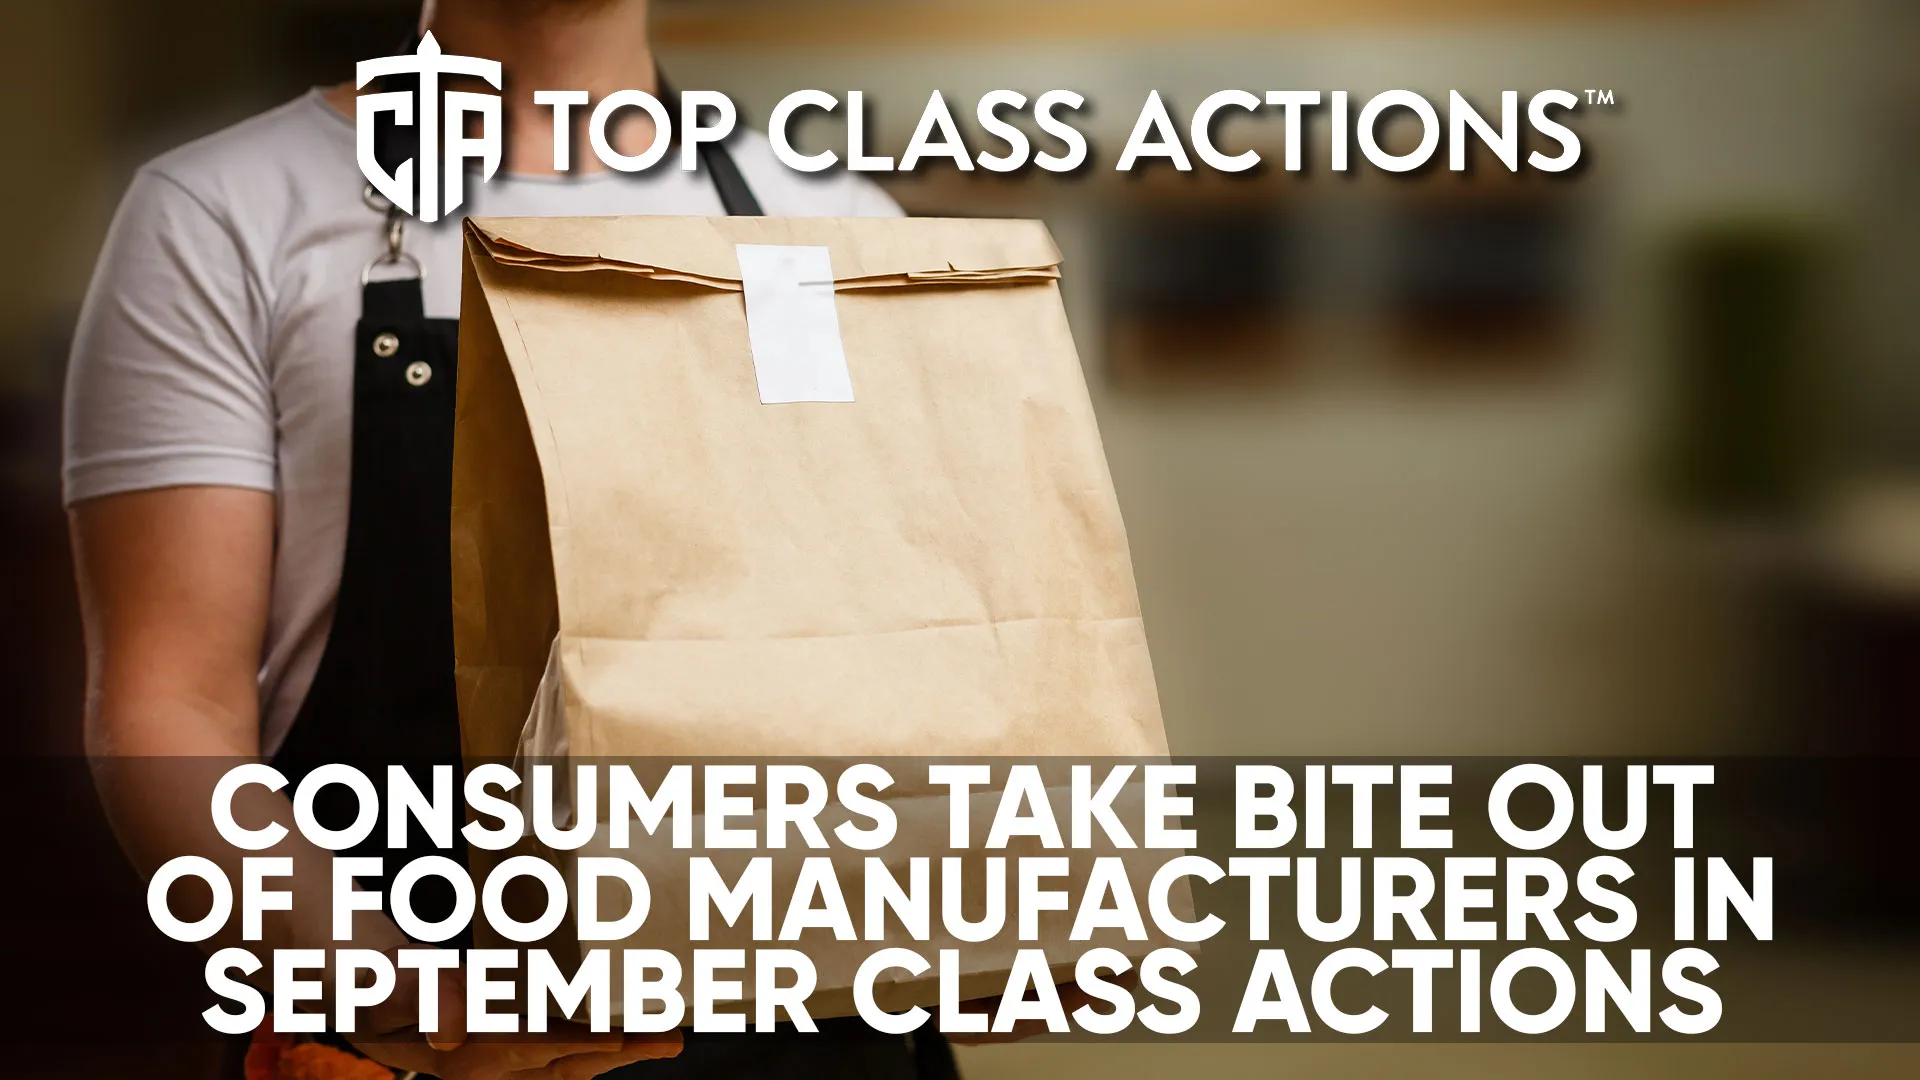 Consumers take bite out of food manufacturers in September class actions